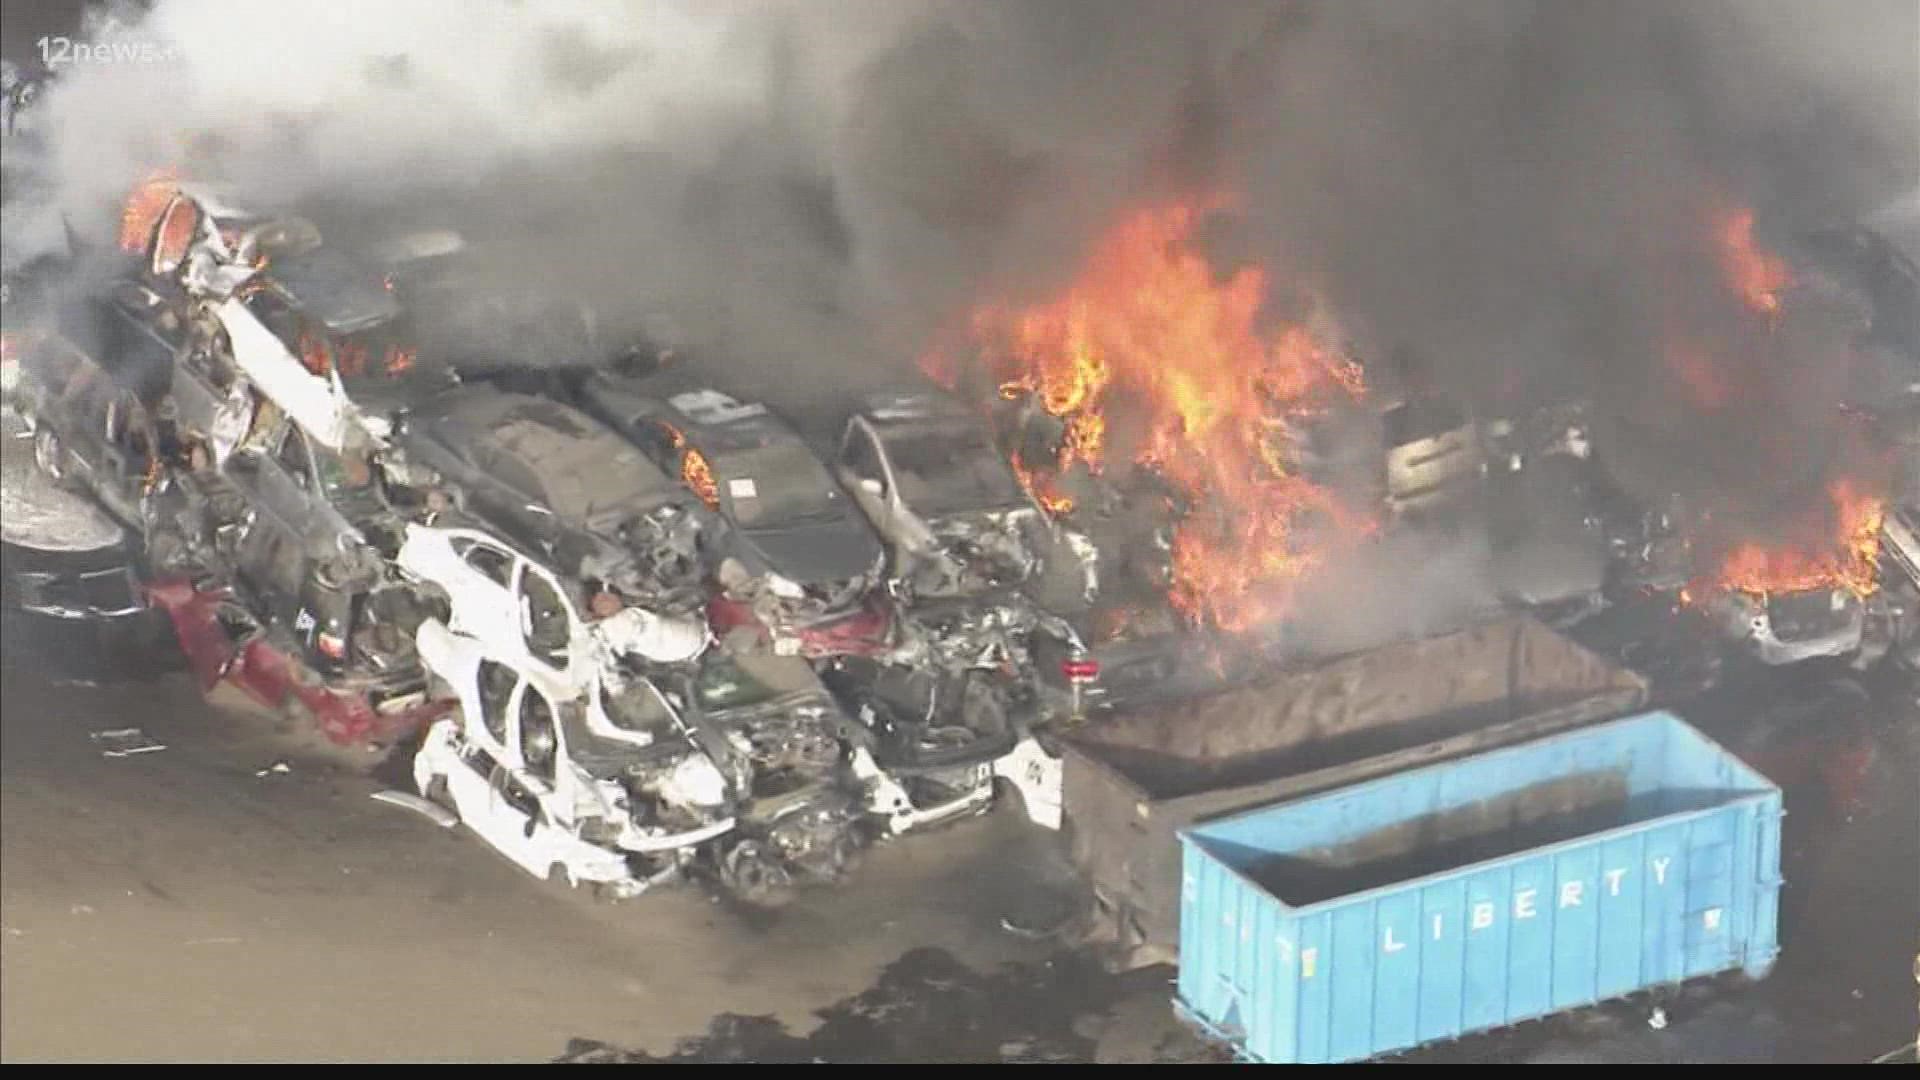 The fire is burning near 27th Avenue and Van Buren Street. Fire sent stacks of cars at the auto salvage yard up in flames.